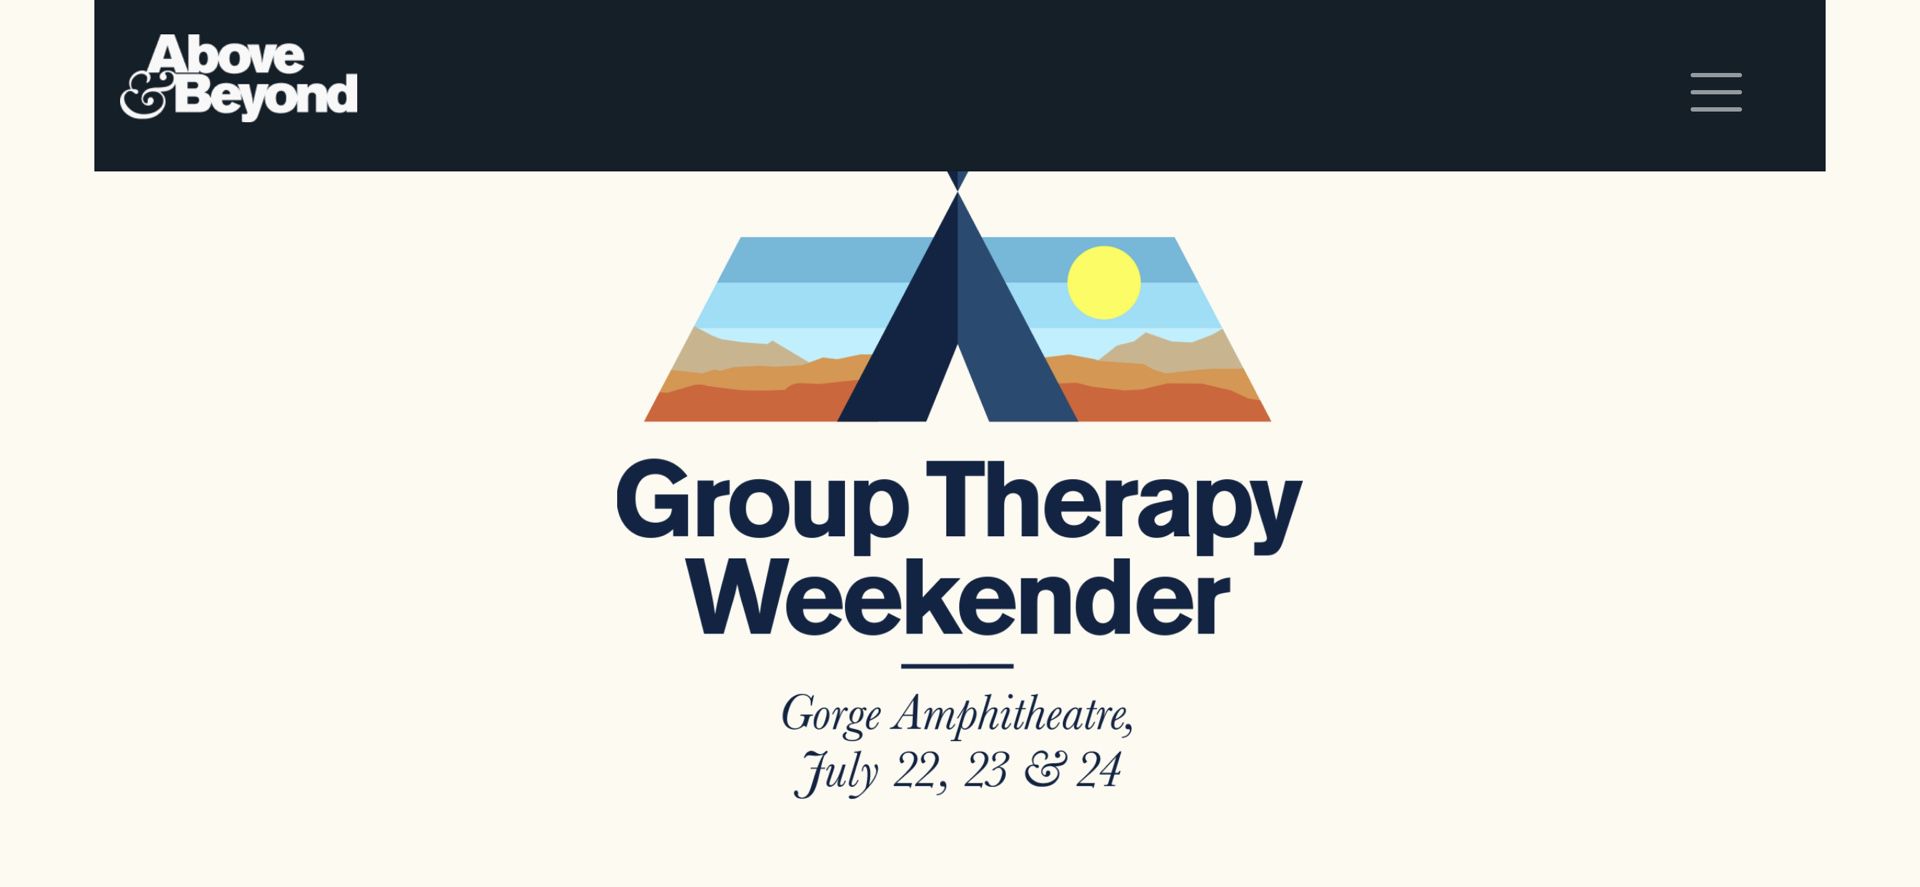 Above And Beyond- 2 Three Day Ticket To The GORGE